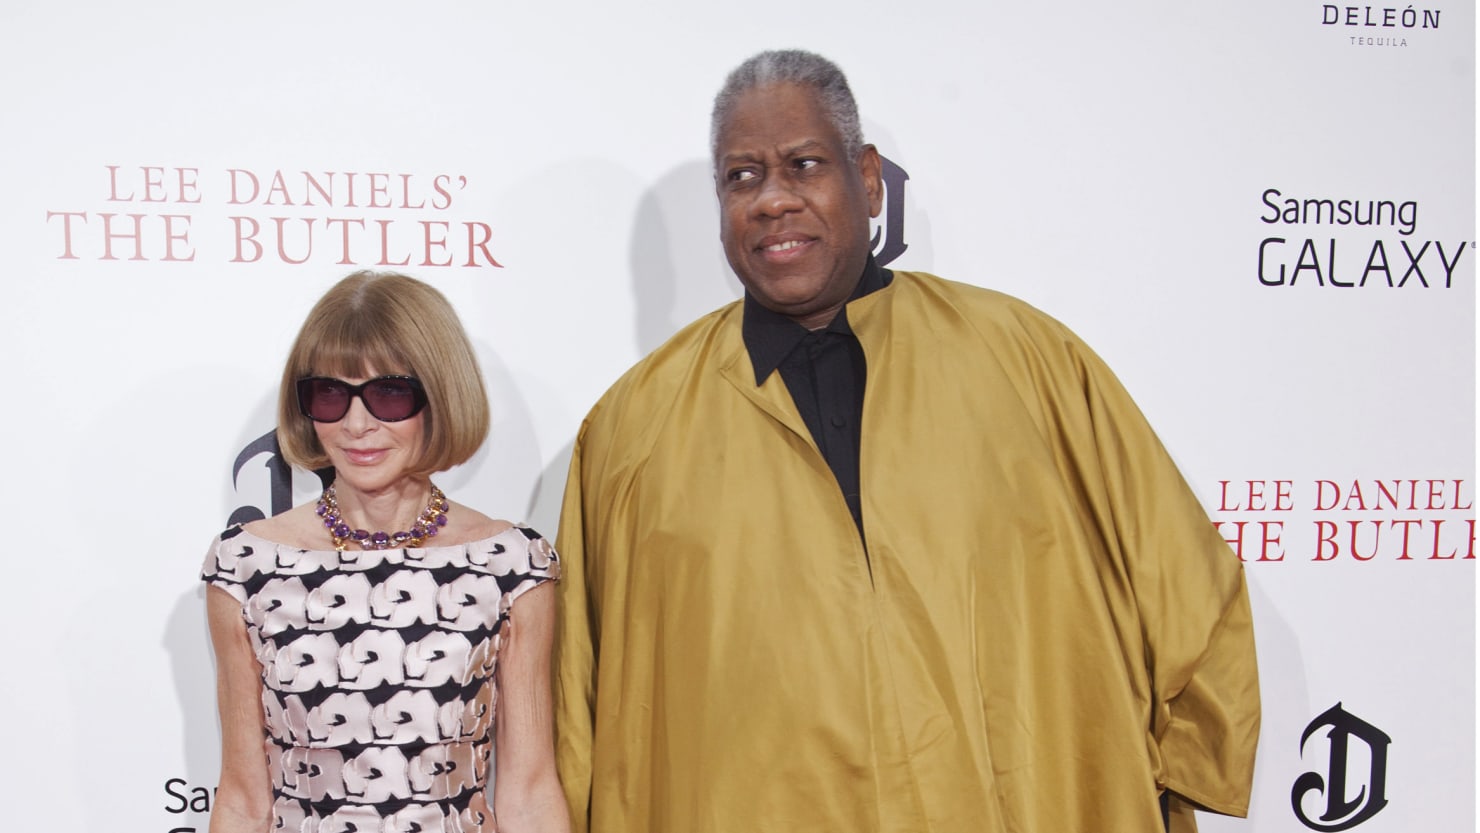 Anna Wintour: Loss of André Leon Talley Is 'Immeasurable